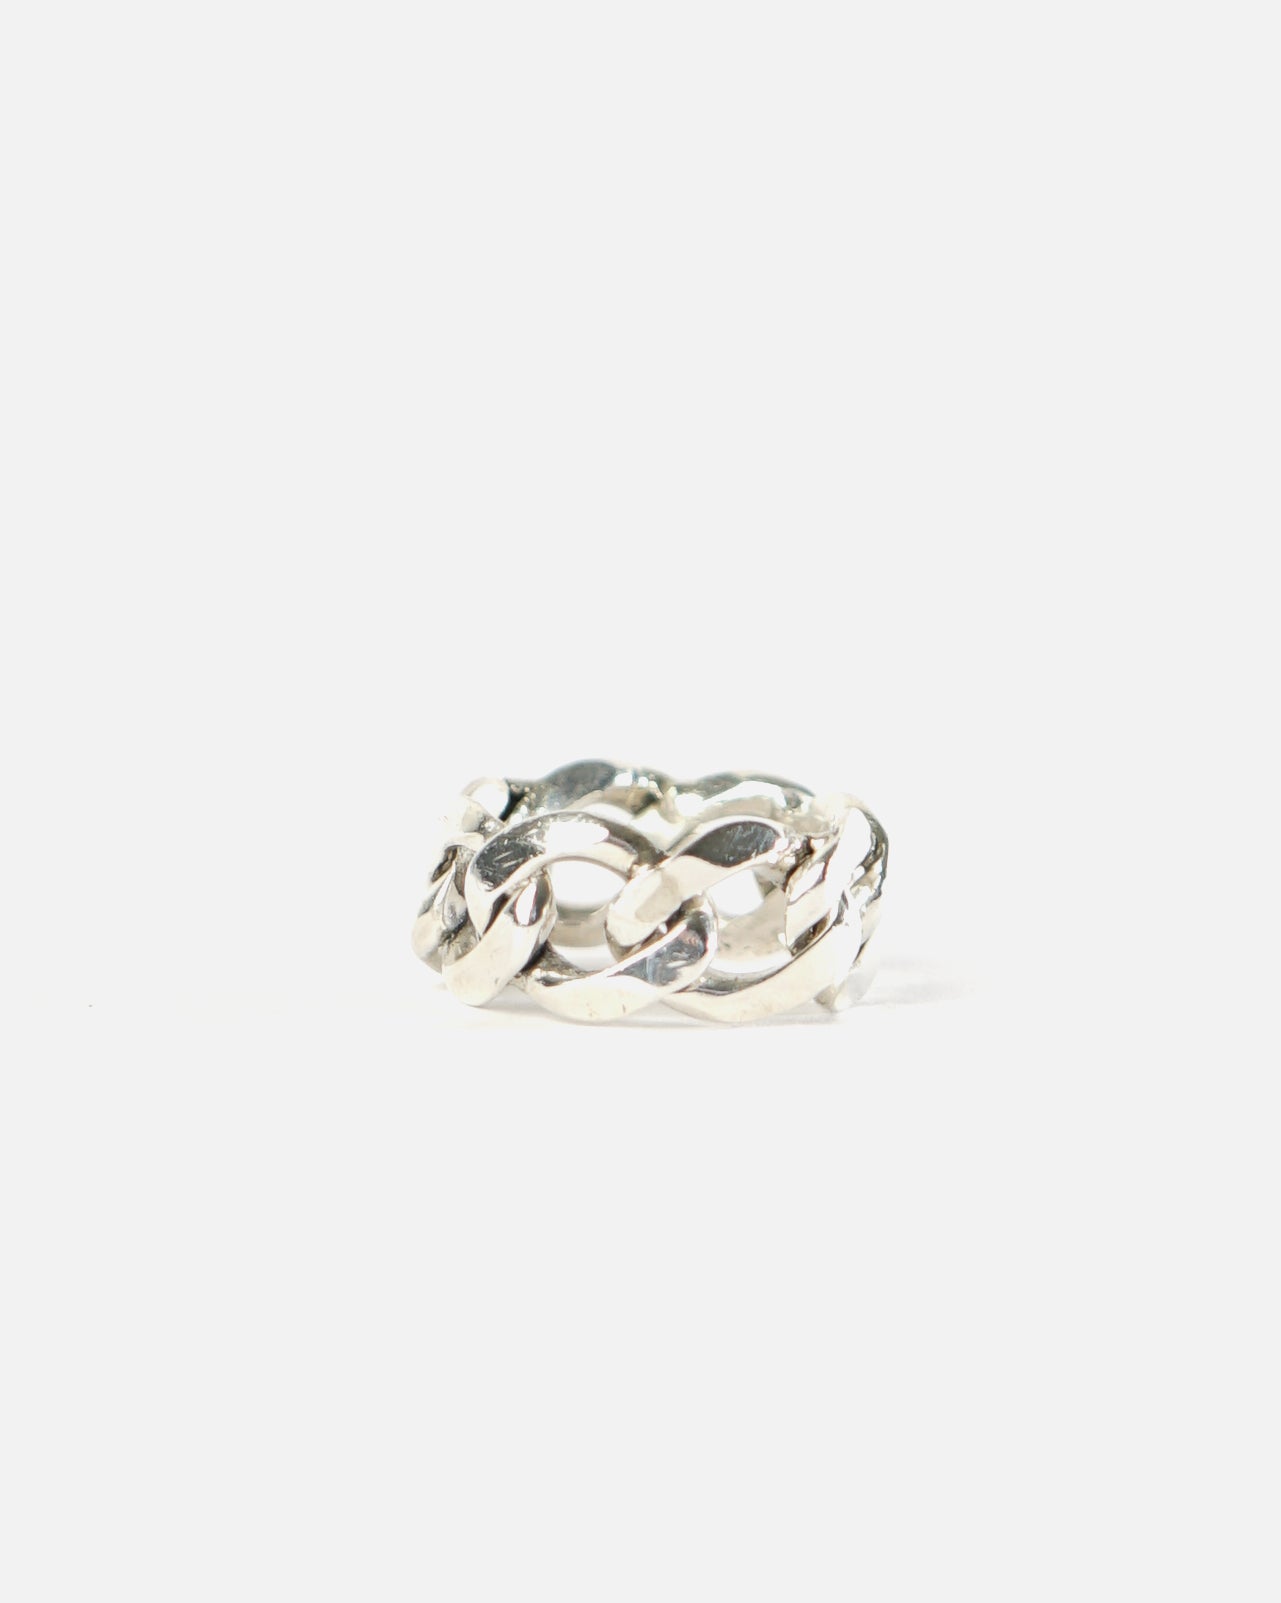 Silver Ring / size: 12